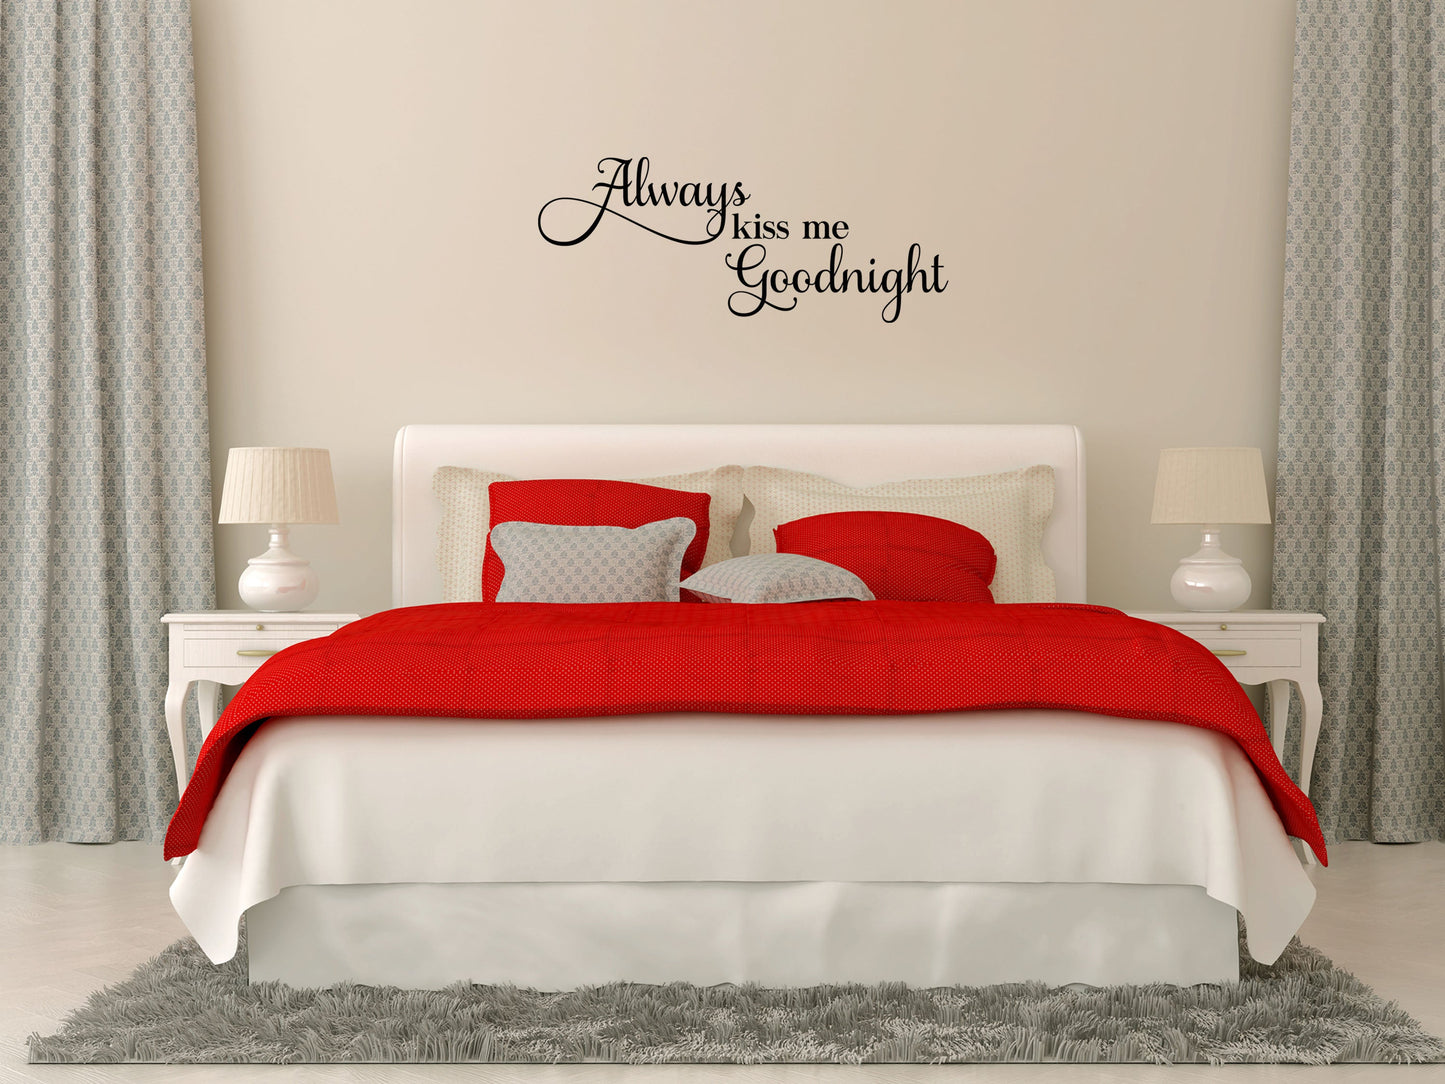 Kiss Me Goodnight - Inspirational Wall Decals Vinyl Wall Decal Done 